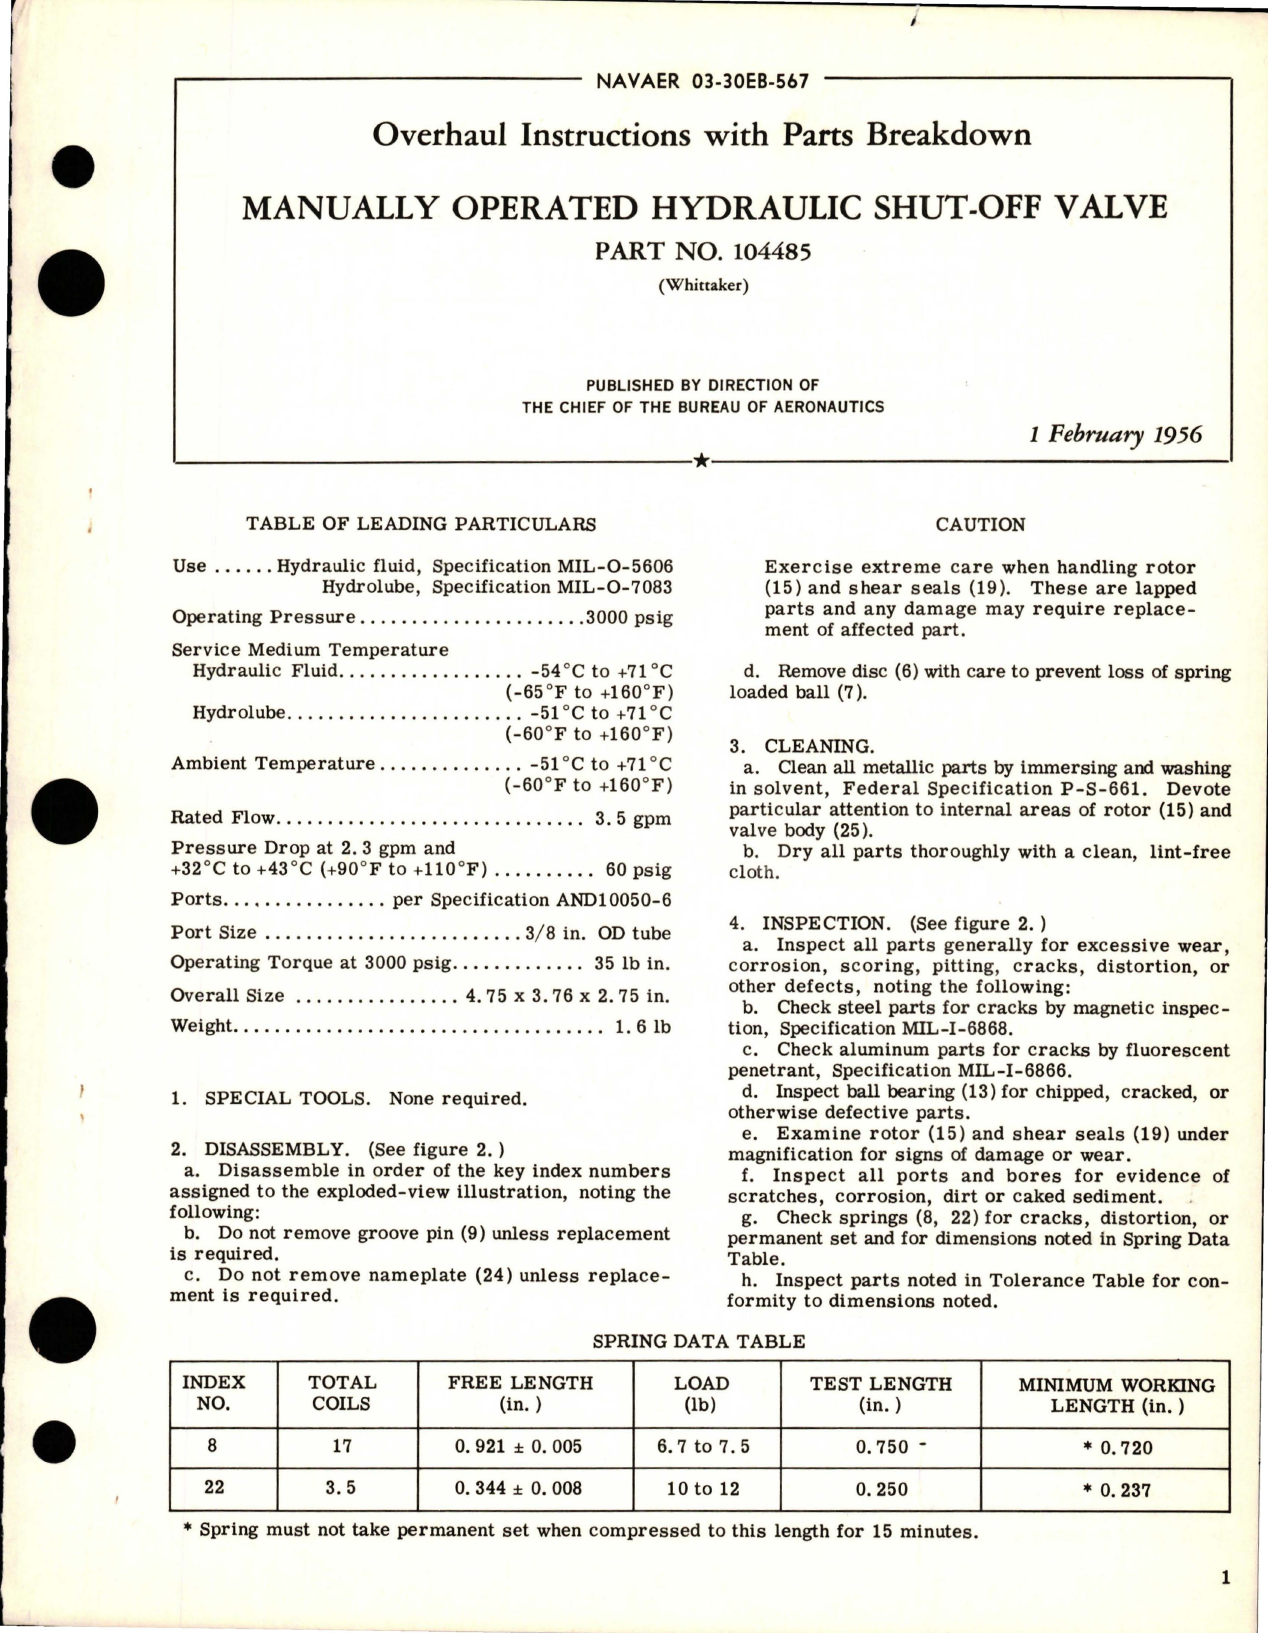 Sample page 1 from AirCorps Library document: Overhaul Instructions with Parts for Manually Operated Hydraulic Shut Off Valve - Part 104485